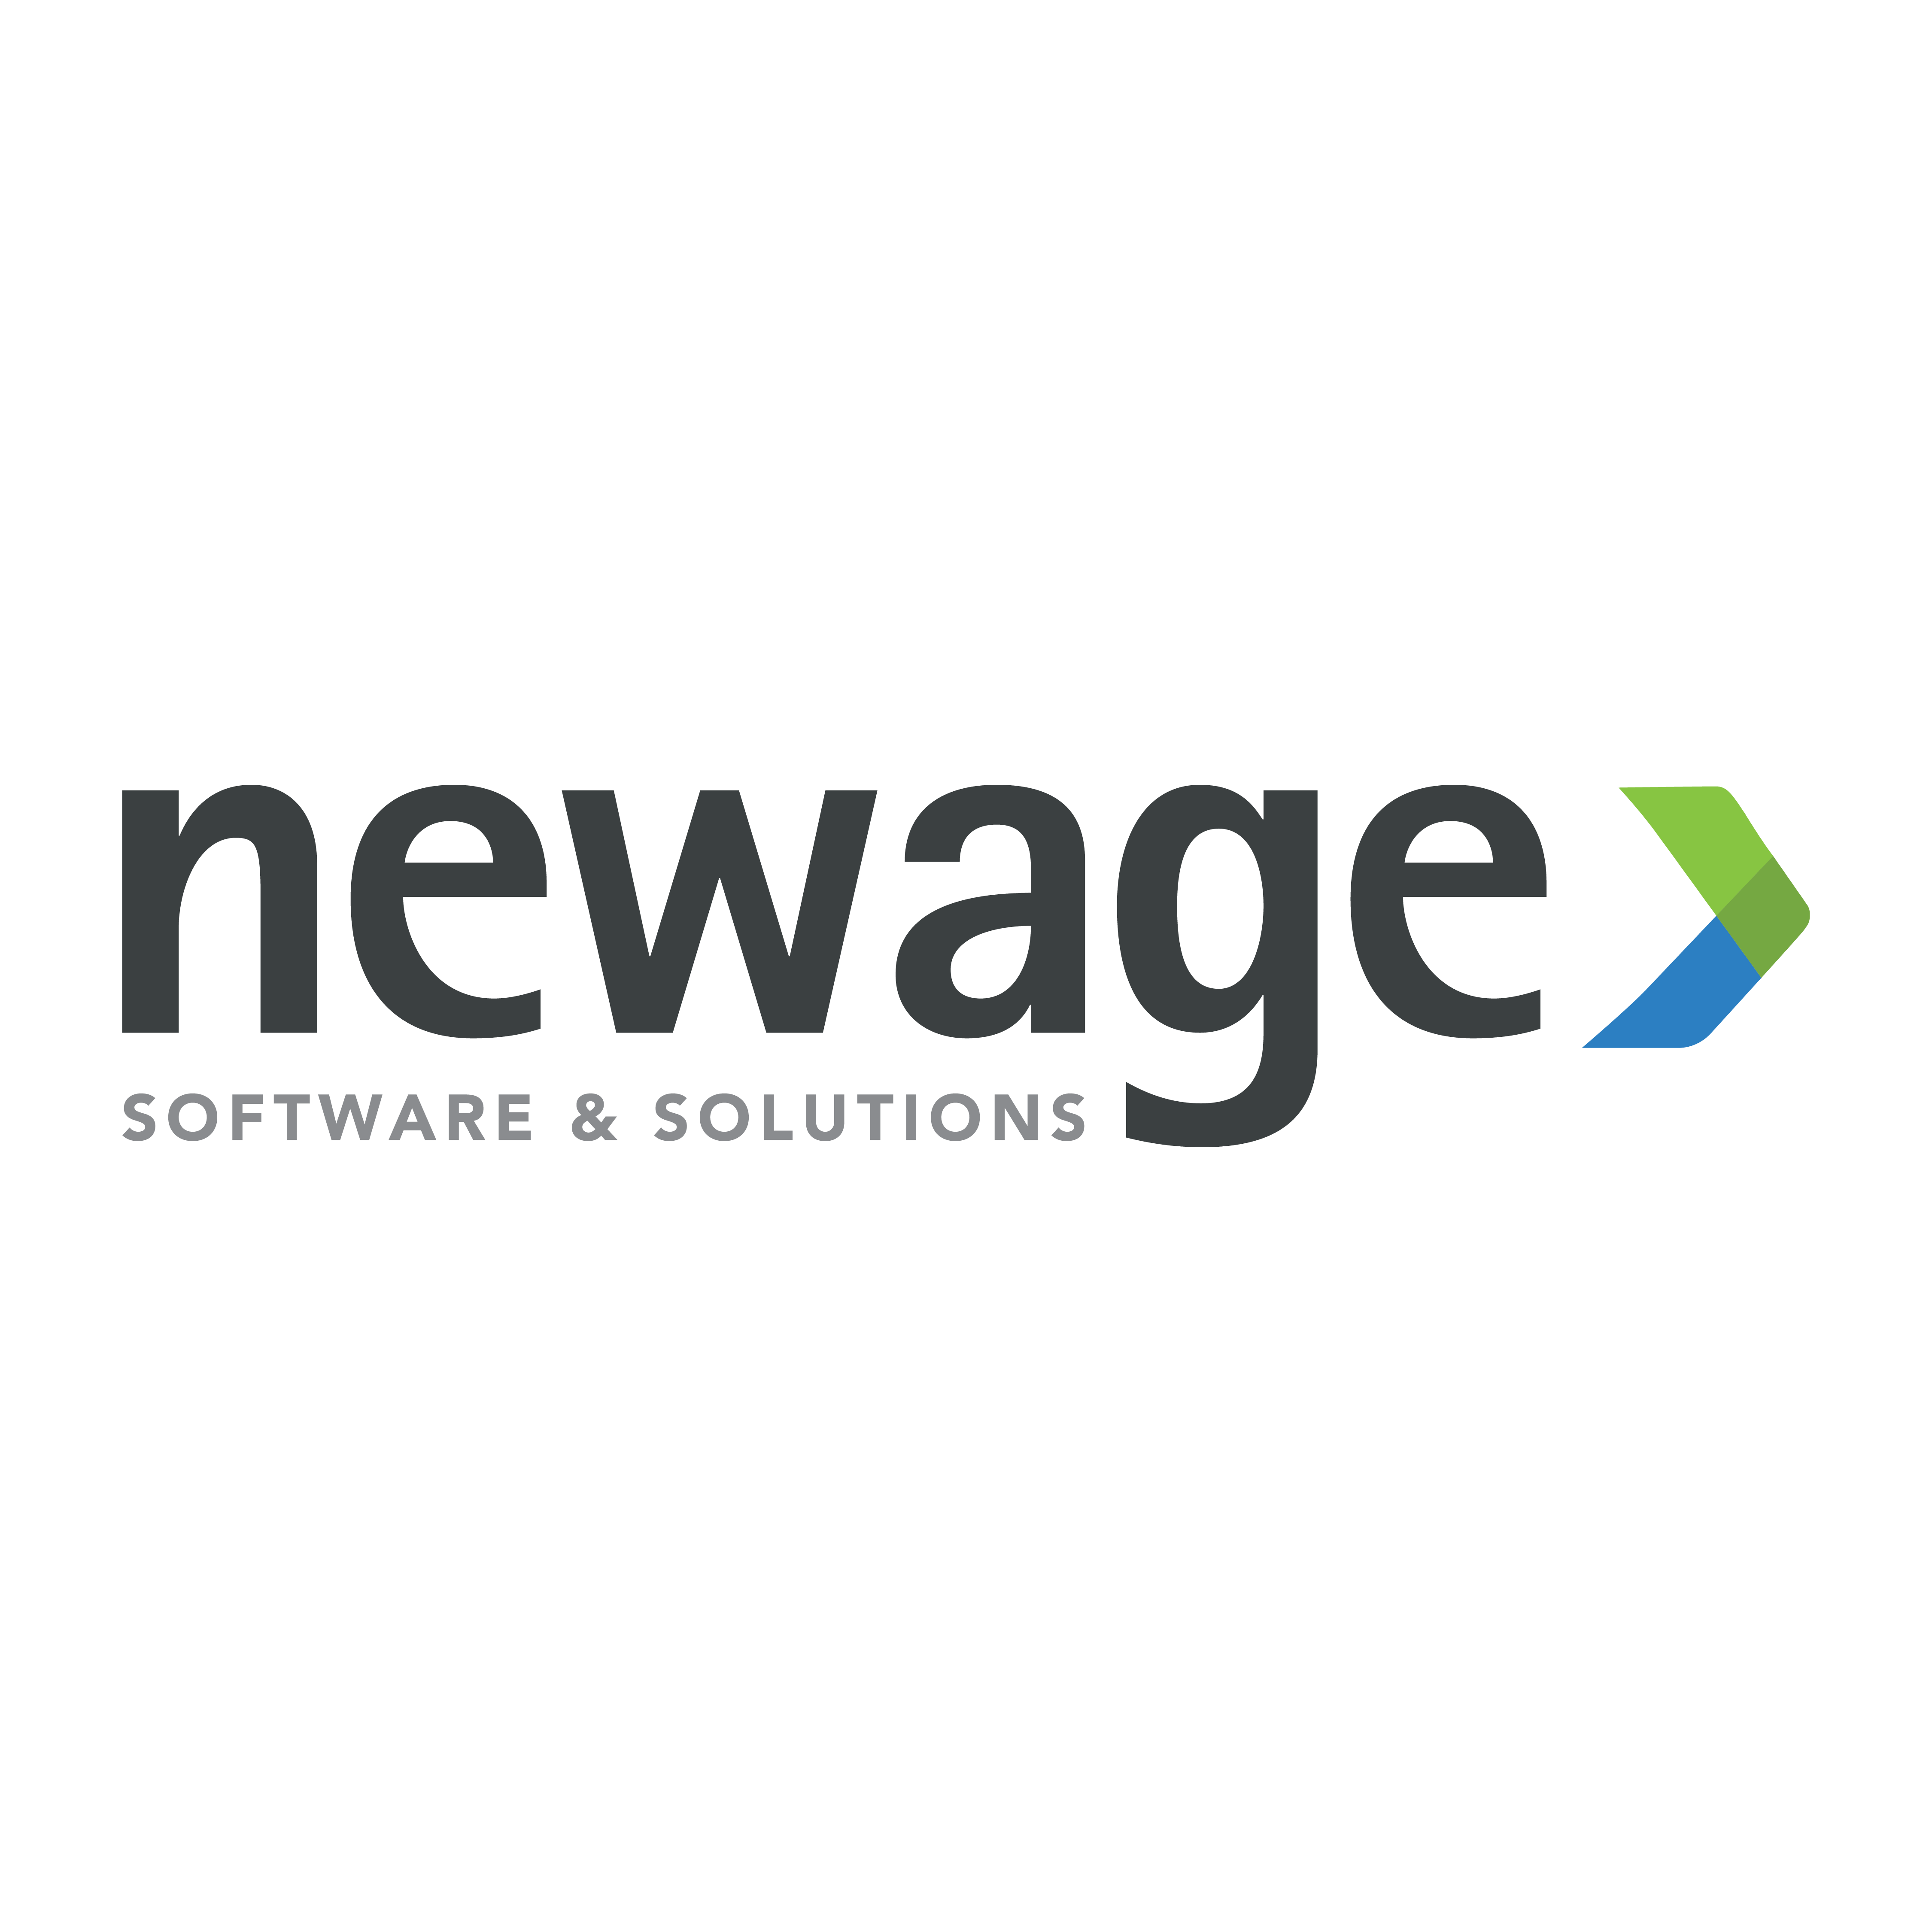 NEWAGE SOFTWARE & SOLUTIONS INDIA PVT. LTD.